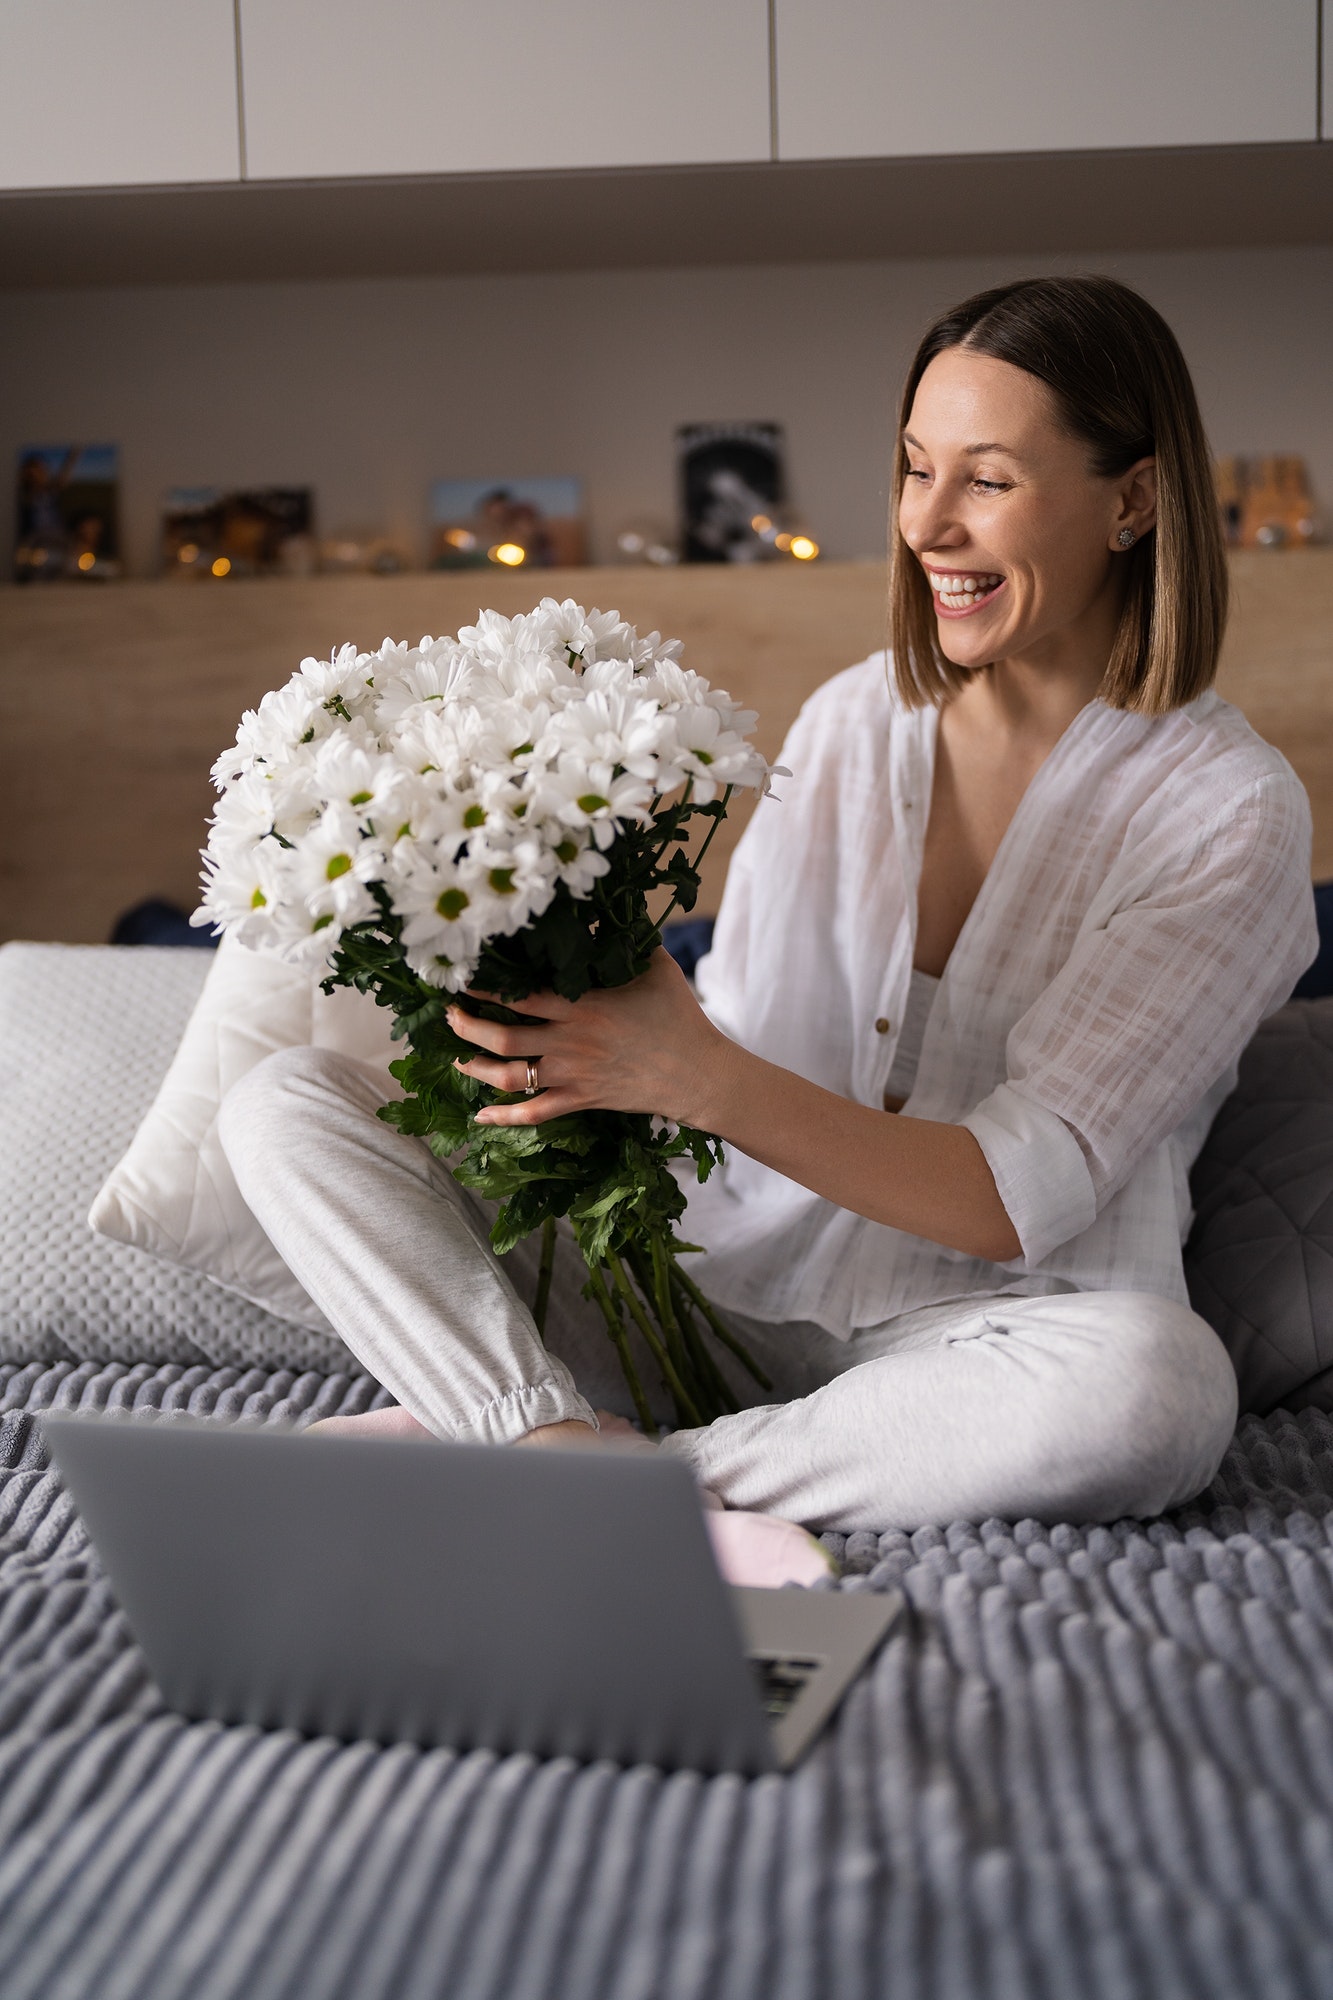 Happy woman smiling holding a bunch of flowers with laptop in the forefront